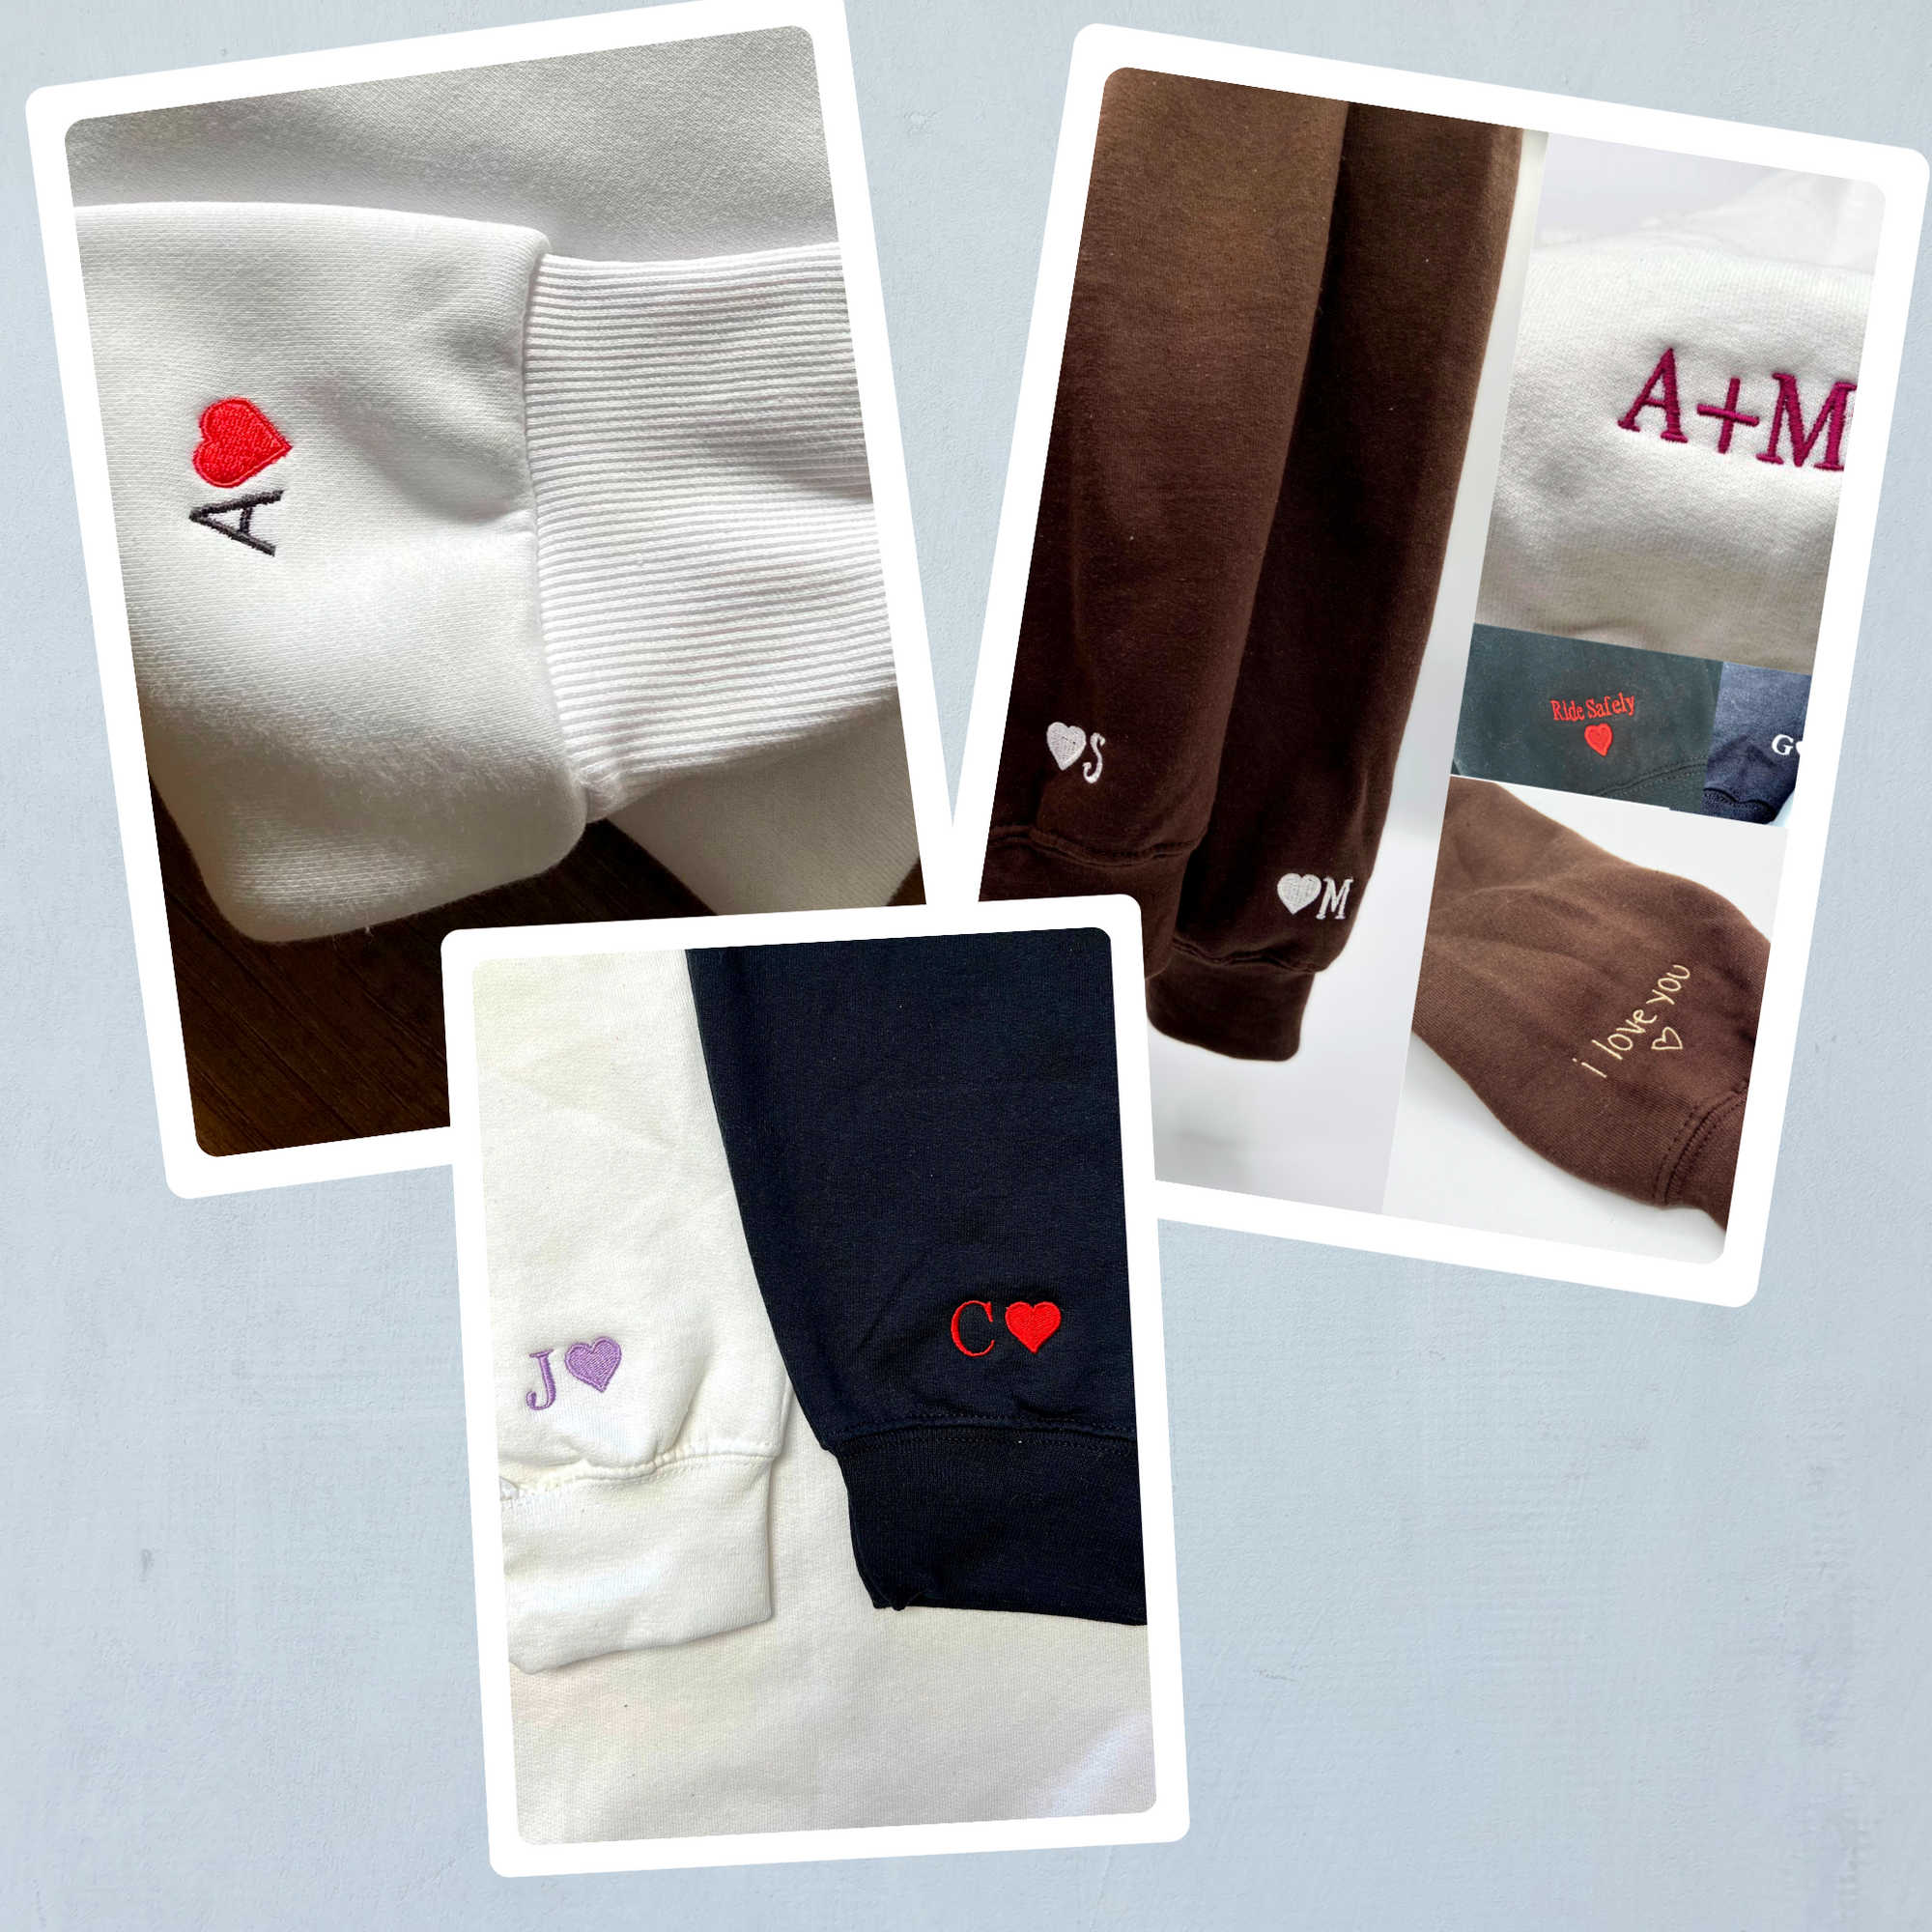 Custom Embroidered Sweatshirts For Couples, Custom Matching Couple Sweatshirt, Cute Frozen Princess Couples Embroidered Crewneck Sweater